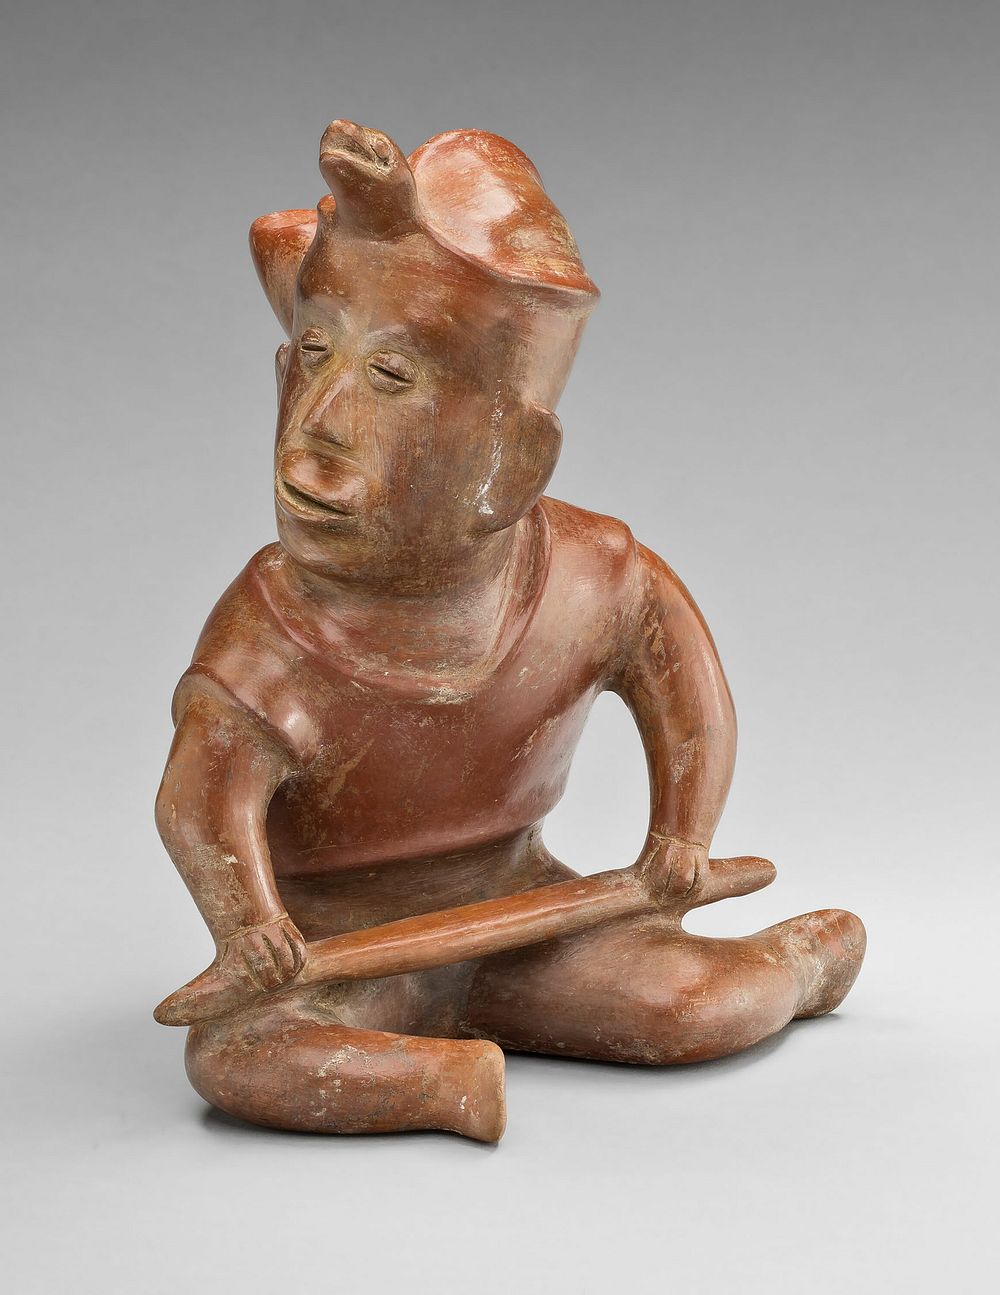 Seated Warrior Figure with Turtle Headdress, Holding a Staff by Colima